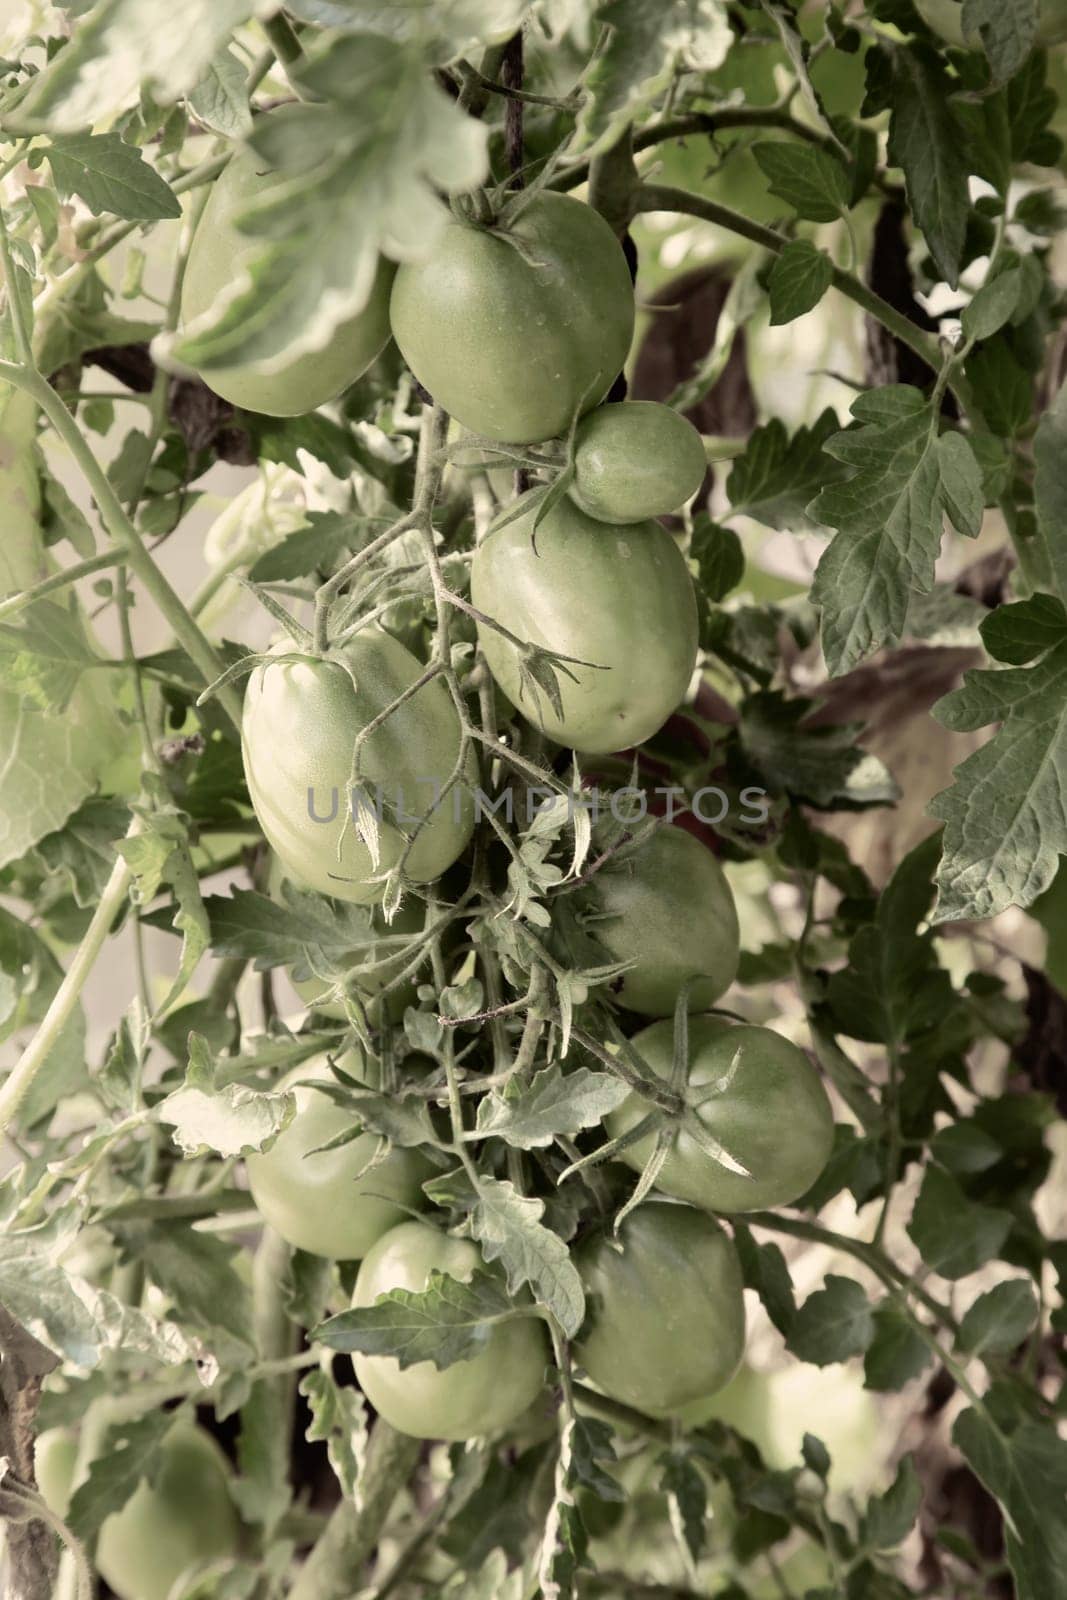 Green tomatoes ripen in a greenhouse on the branches of a plant by georgina198